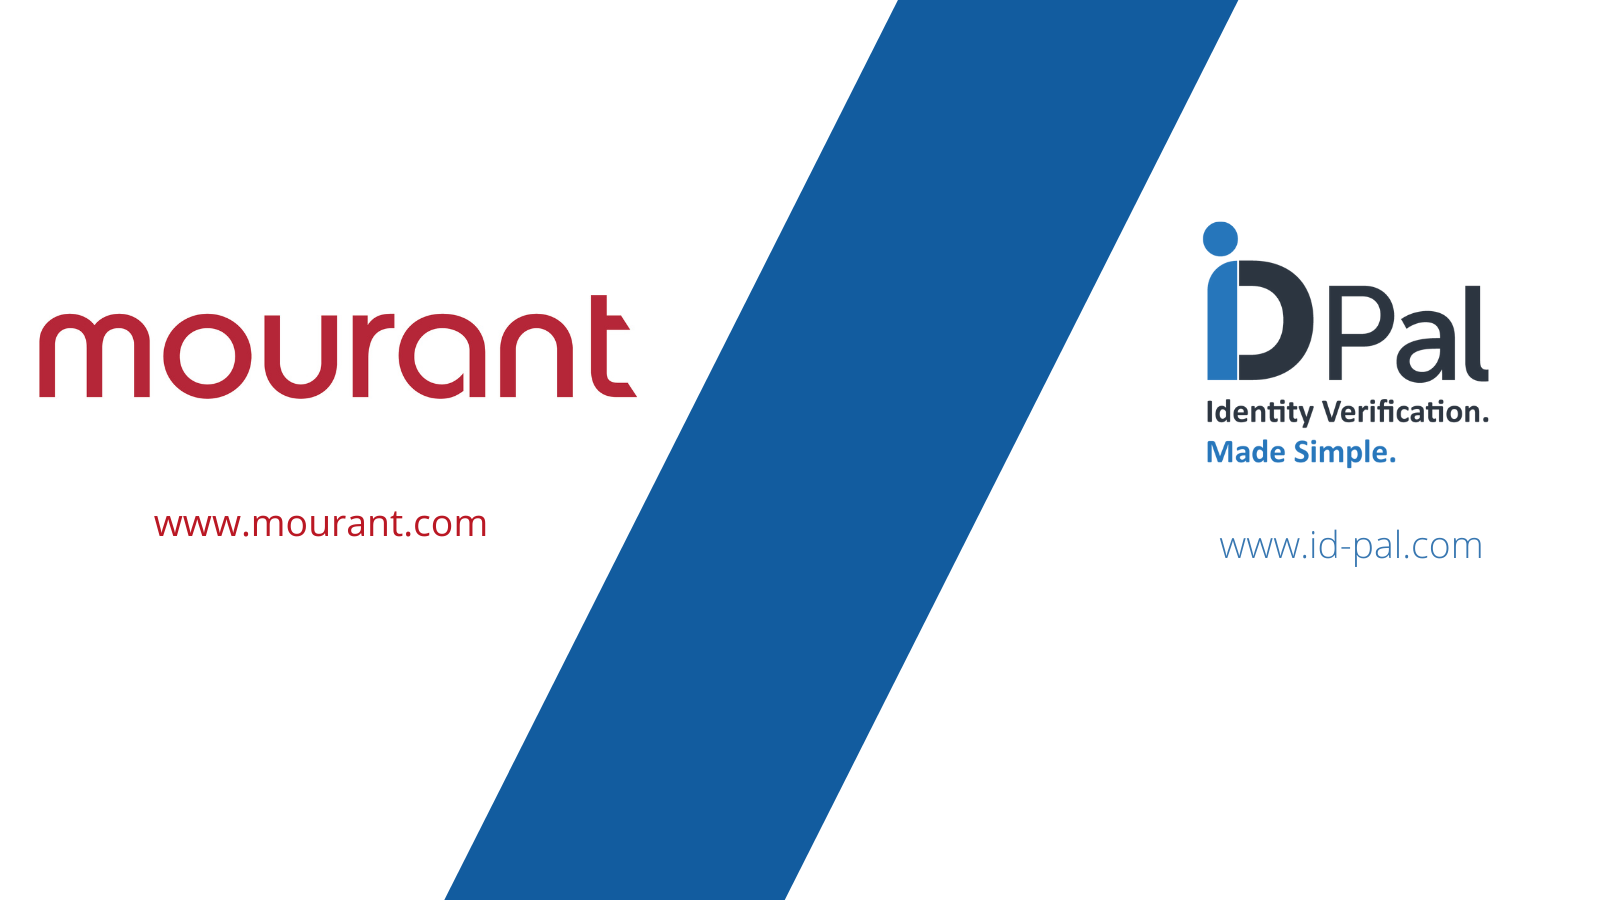 Mourant selects ID-Pal to enhance AML and KYC compliance